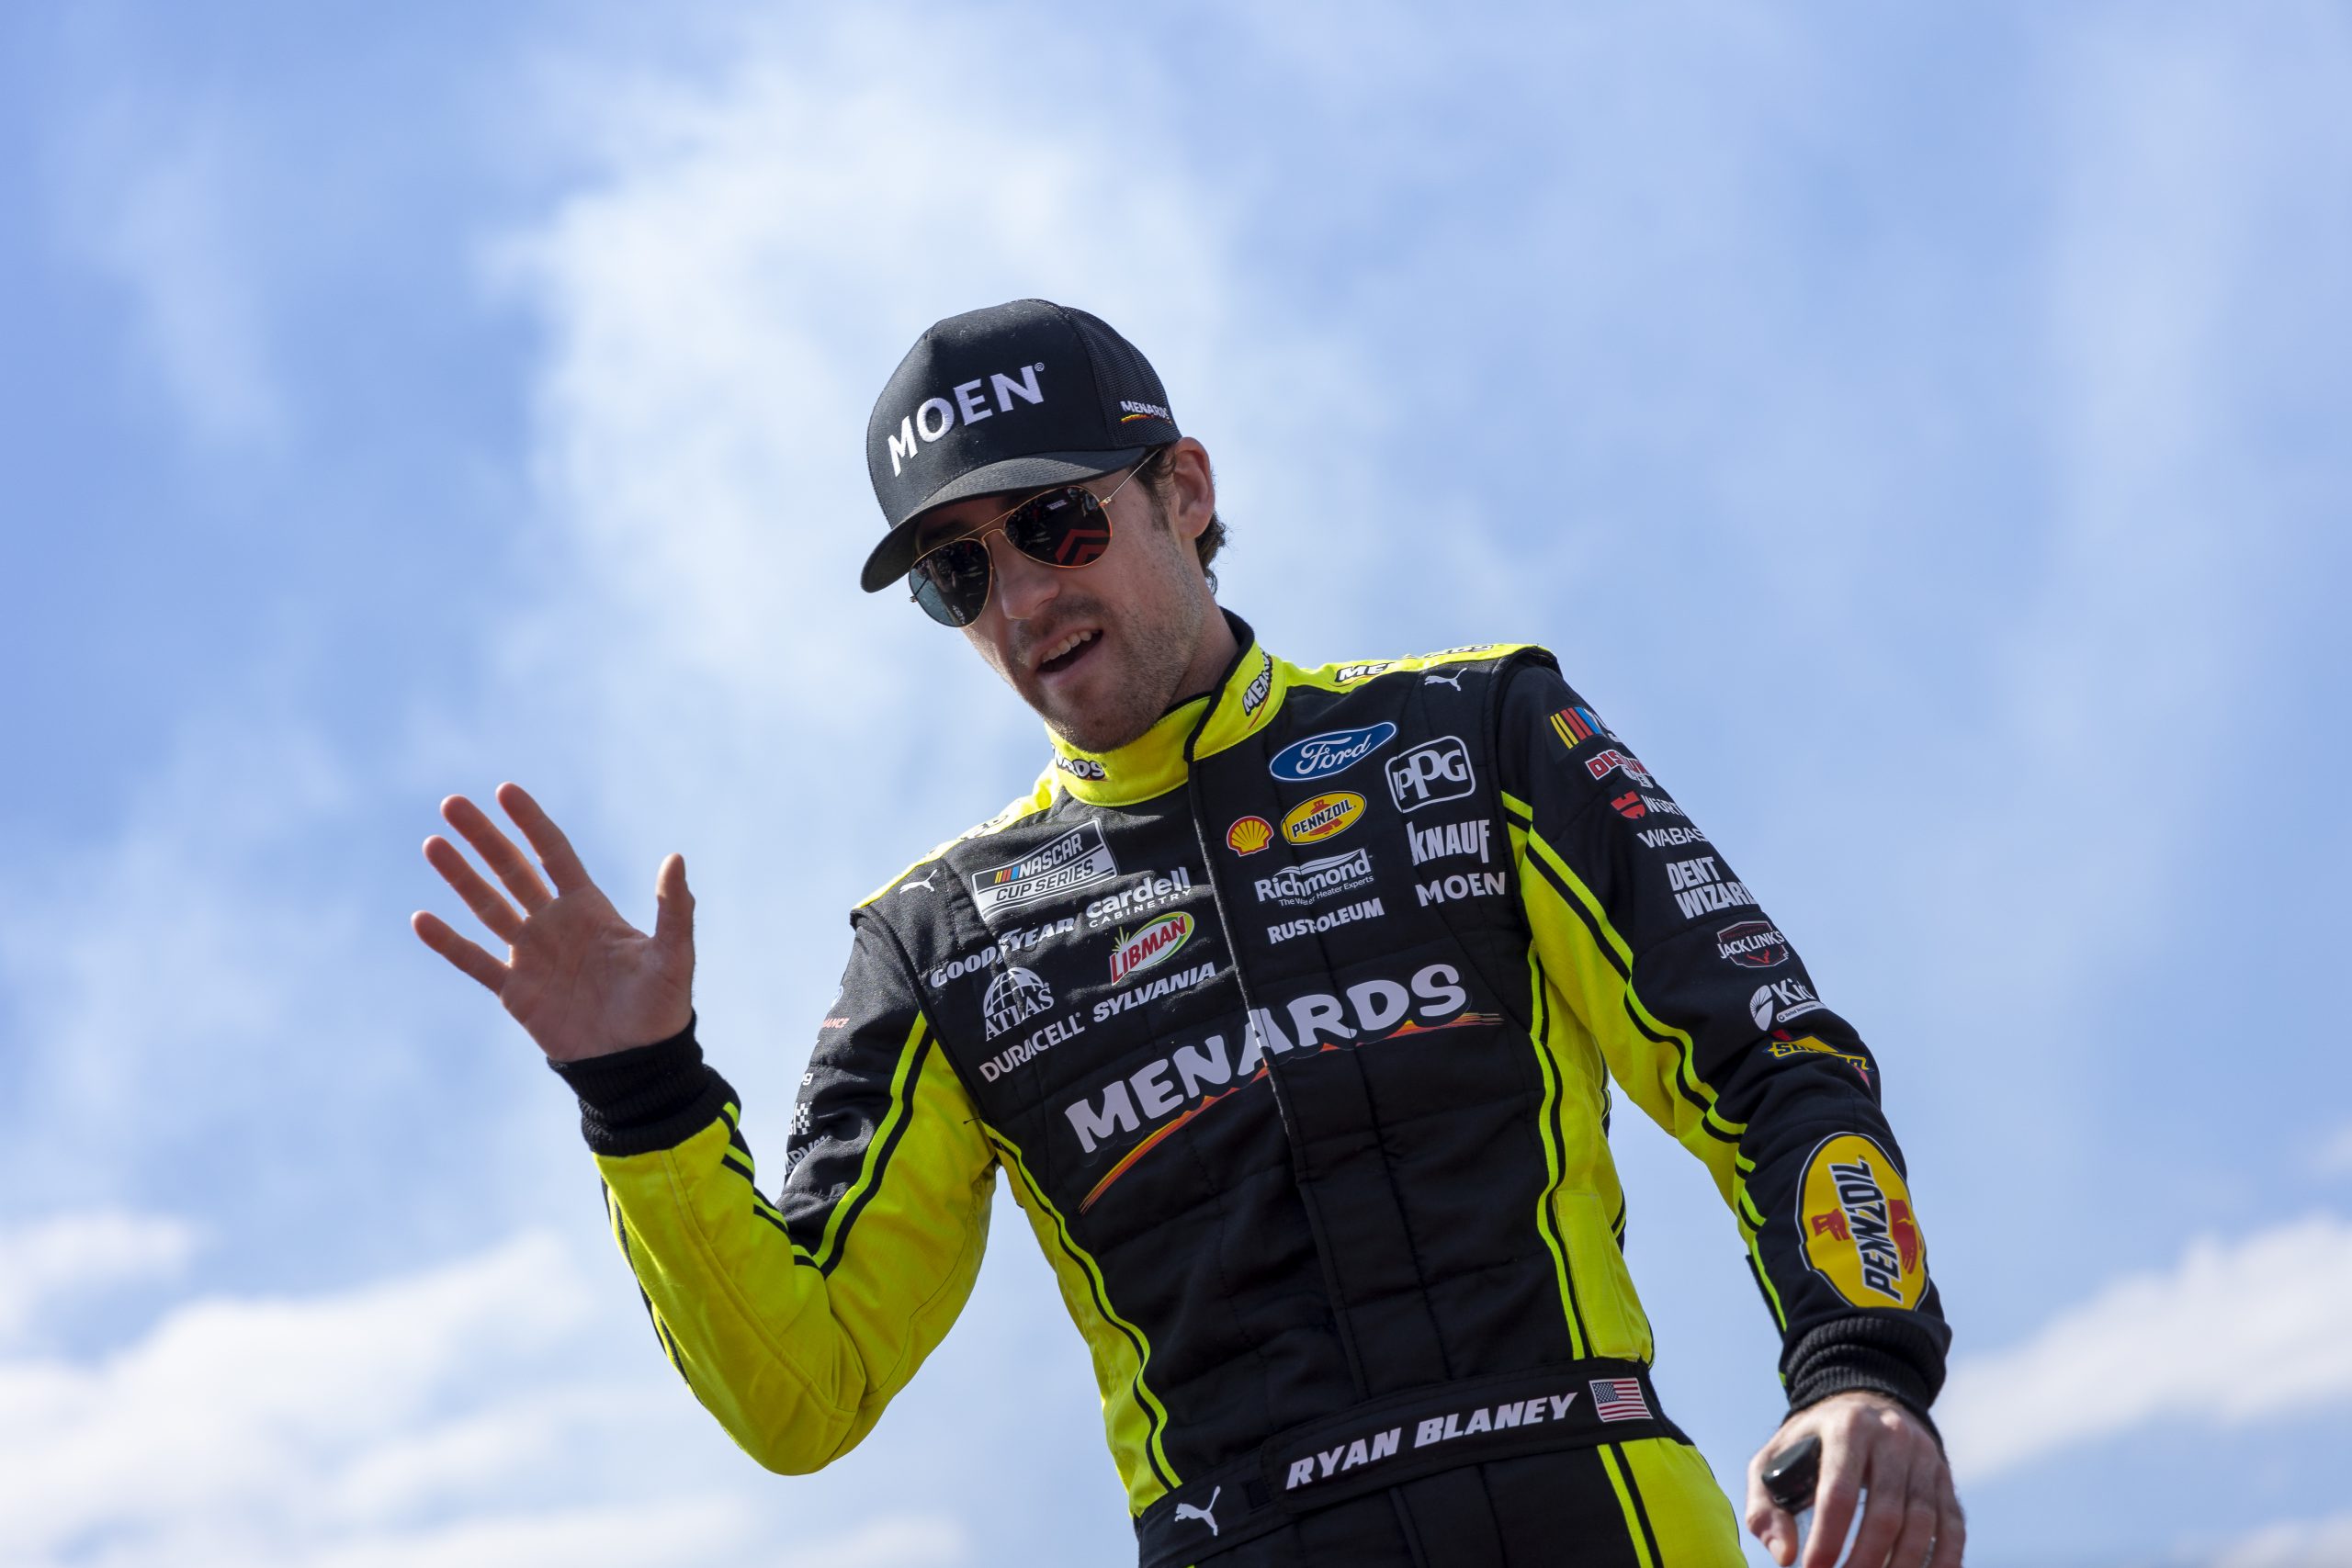 Ryan Blaney would love to improve his most recent finishing position at Martinsville by two spots. (Photo: Mitchell Richtmyre | The Podium Finish)